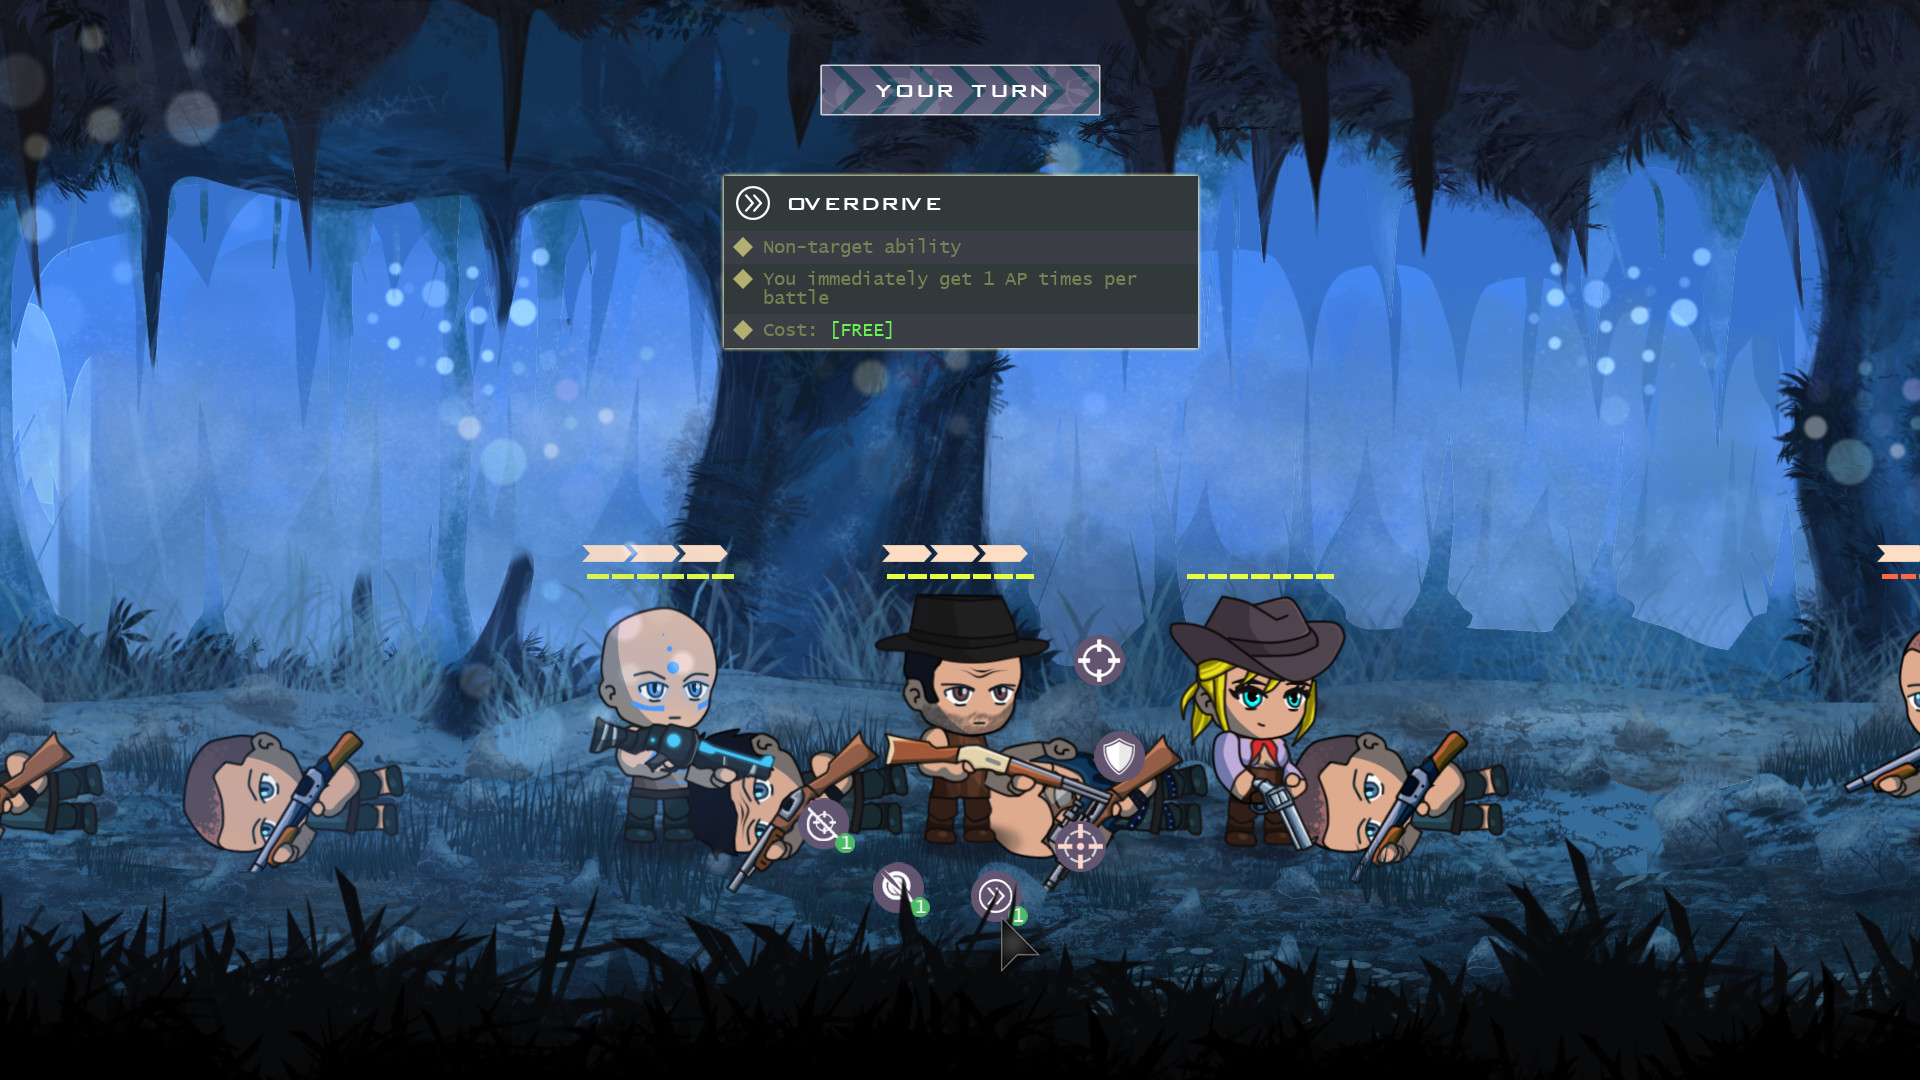 The Expedition screenshot